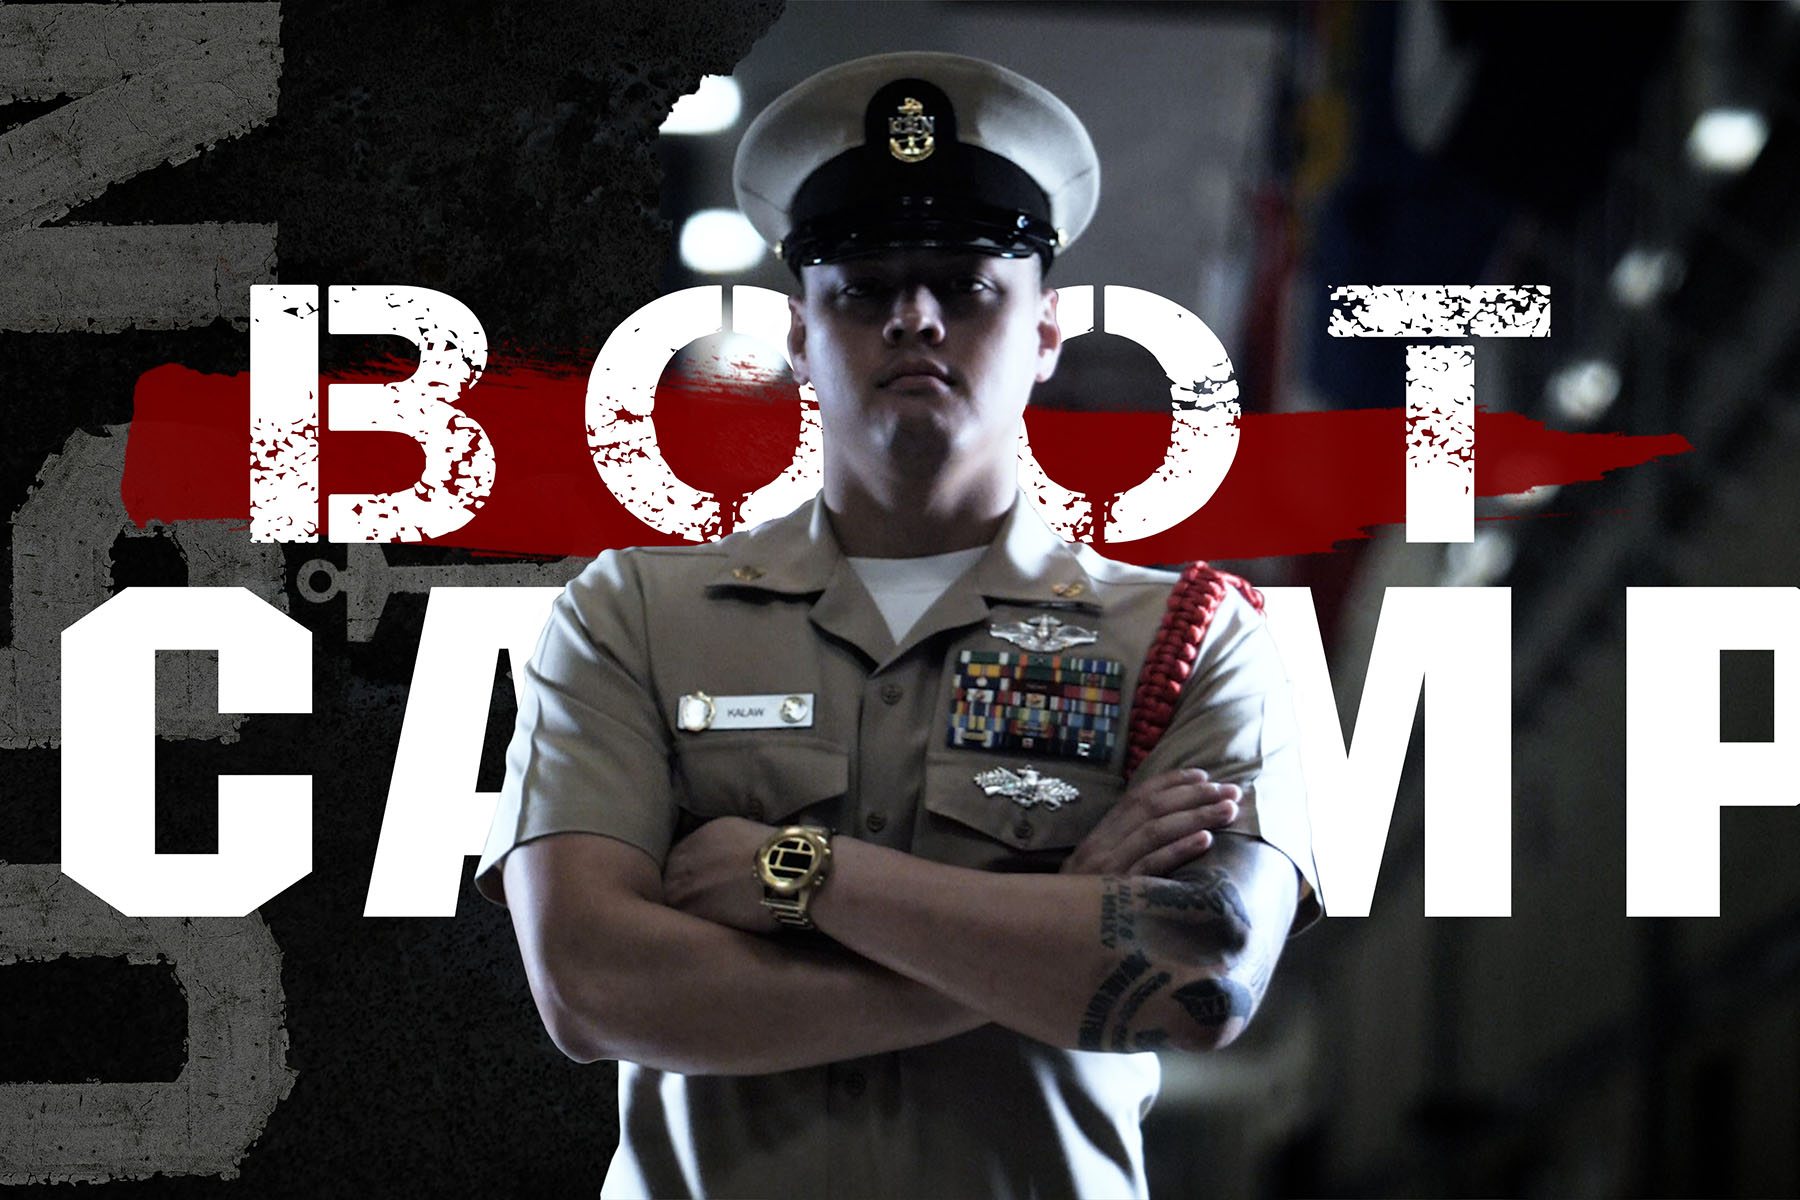 boot camp support software 5.1.5769